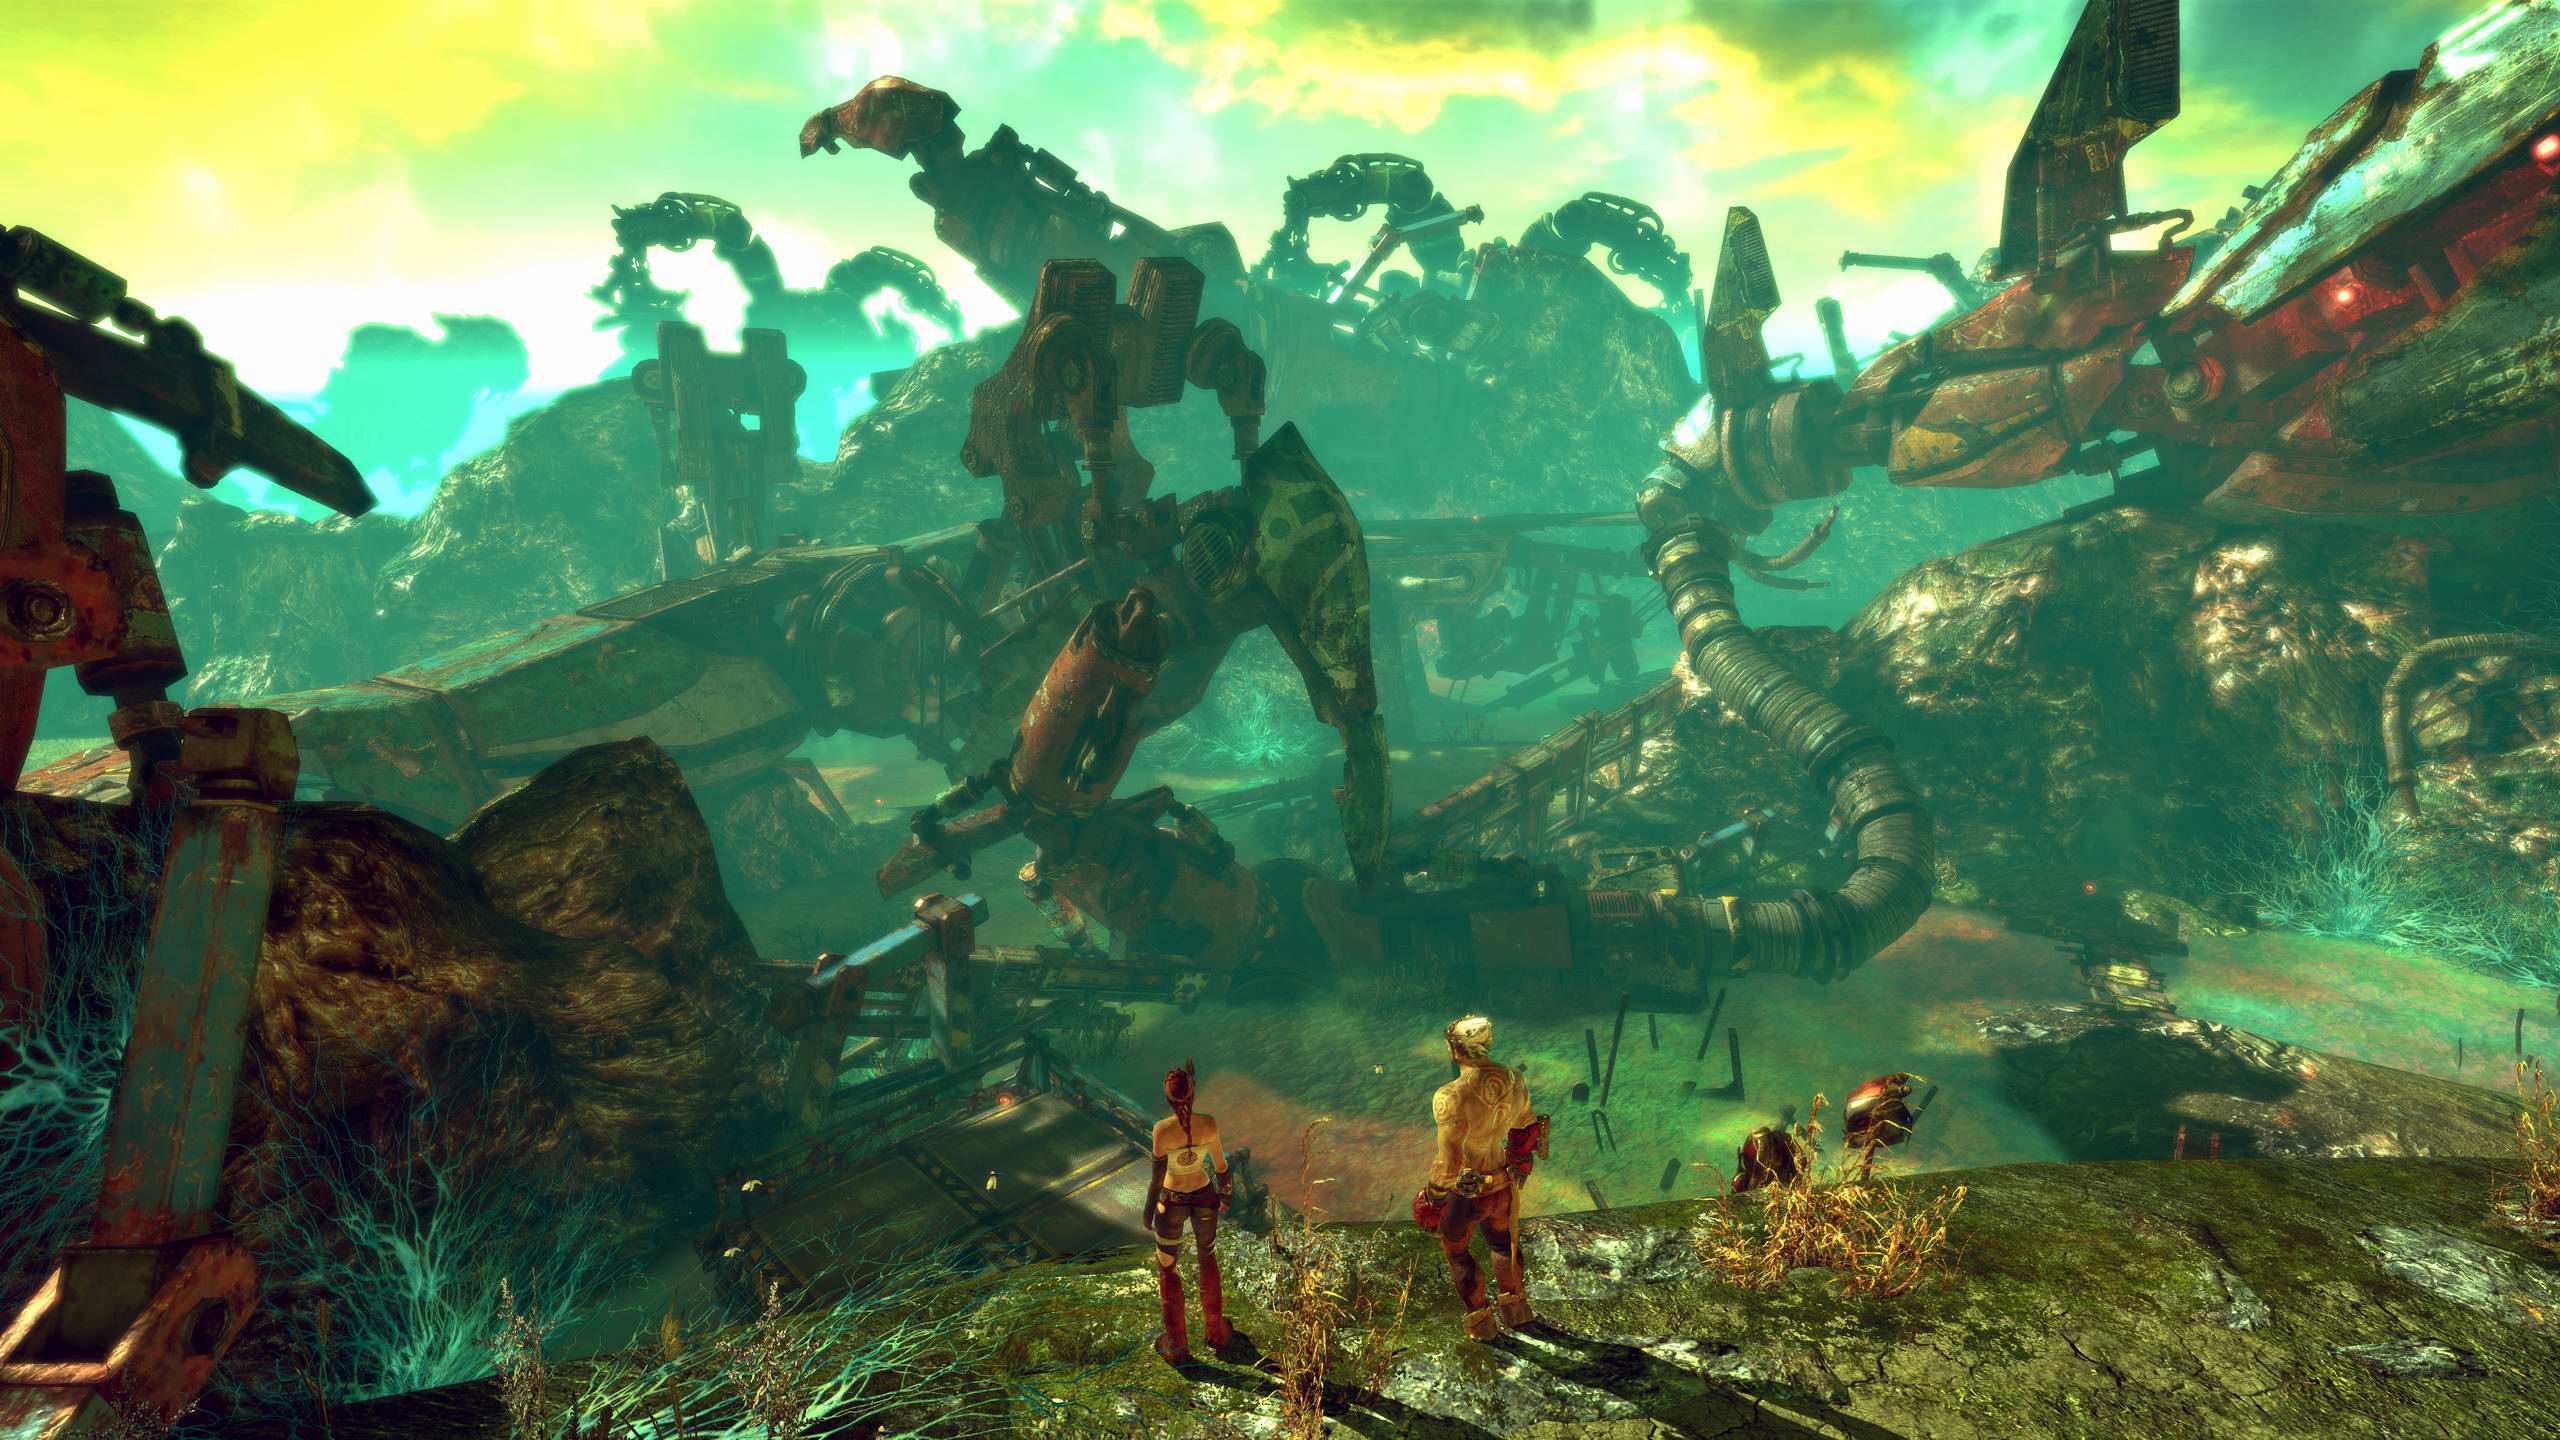 enslaved odyssey to the west metacritic download